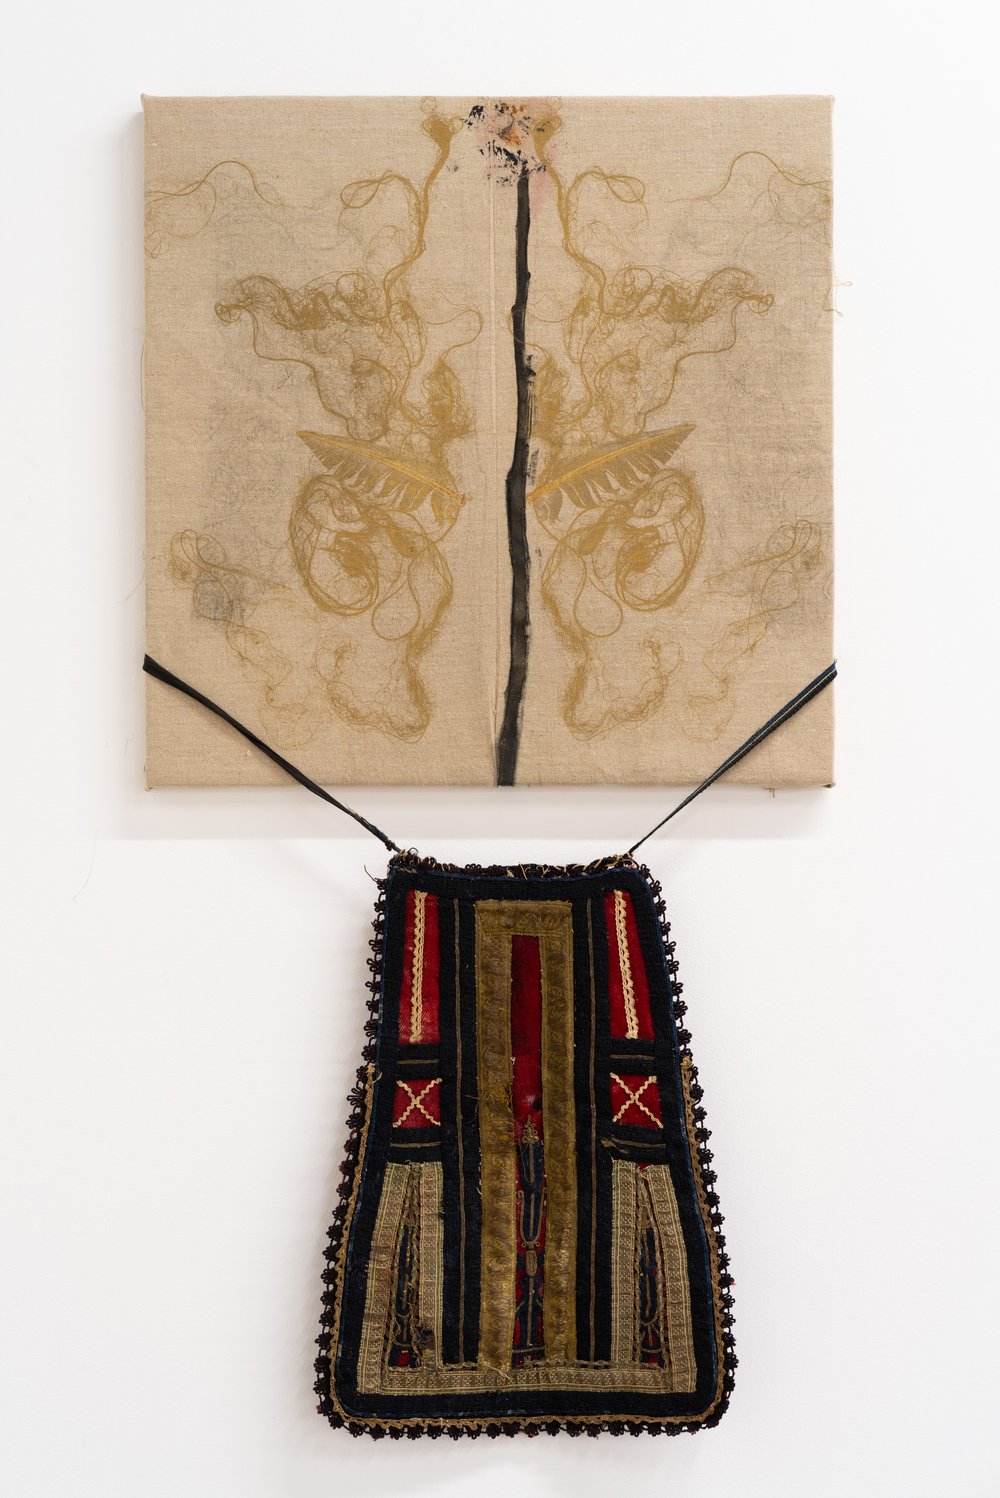  Chrysanne Stathacos,  Rose Apron , 2017-18. Printed hair, rose, and feather on linen and antique apron, 48 x 24 inches. Courtesy of the artist. Photo: Nando Alvarez-Perez. 